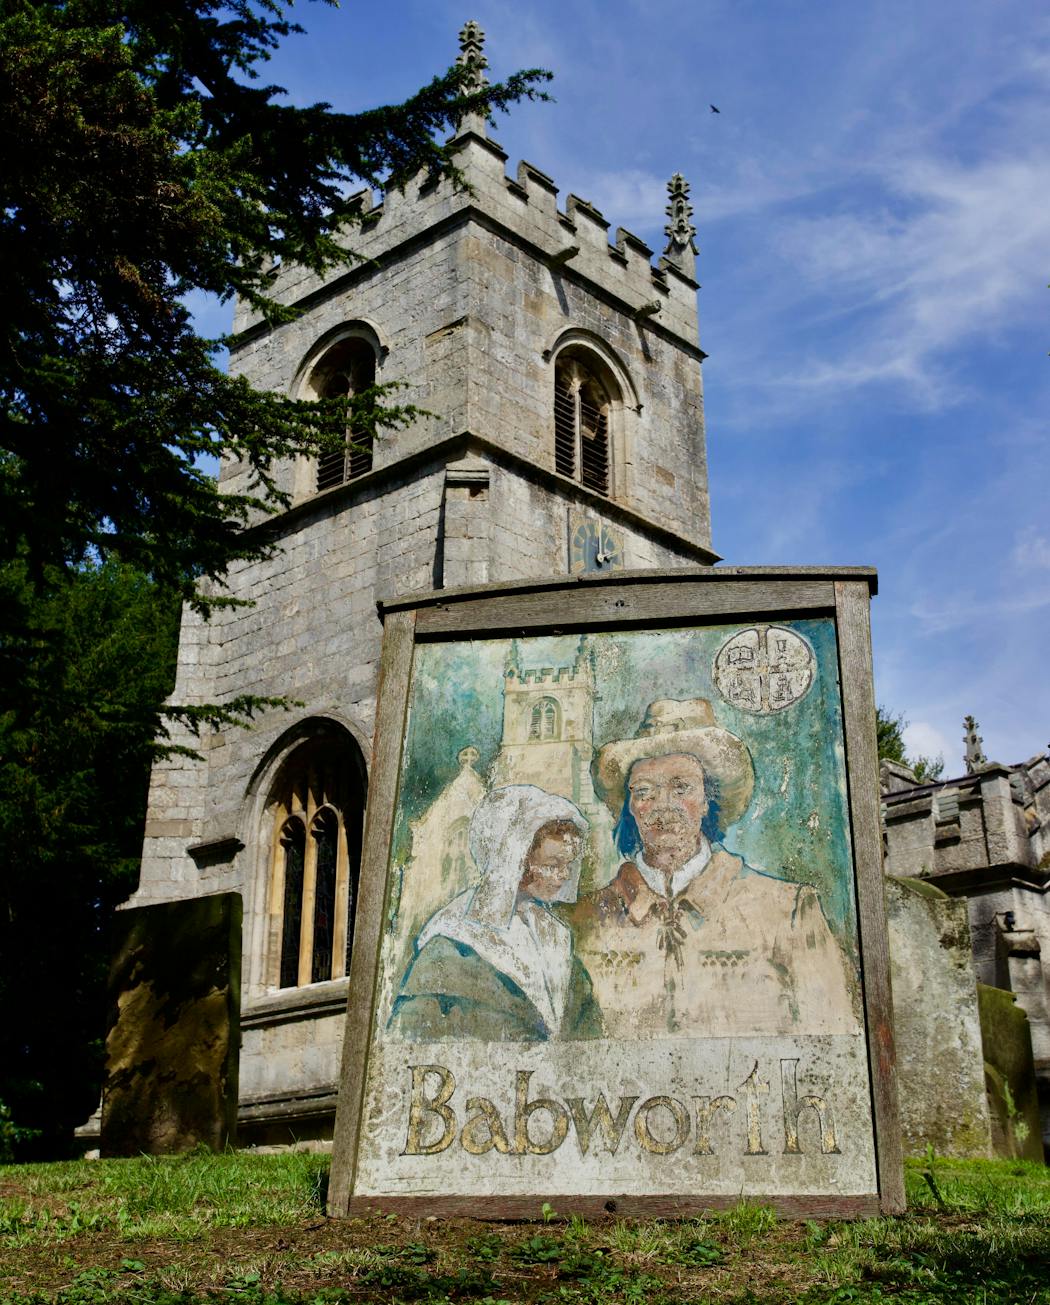 All Saints’ Church in Babworth, England, includes a tribute to its Pilgrim roots.